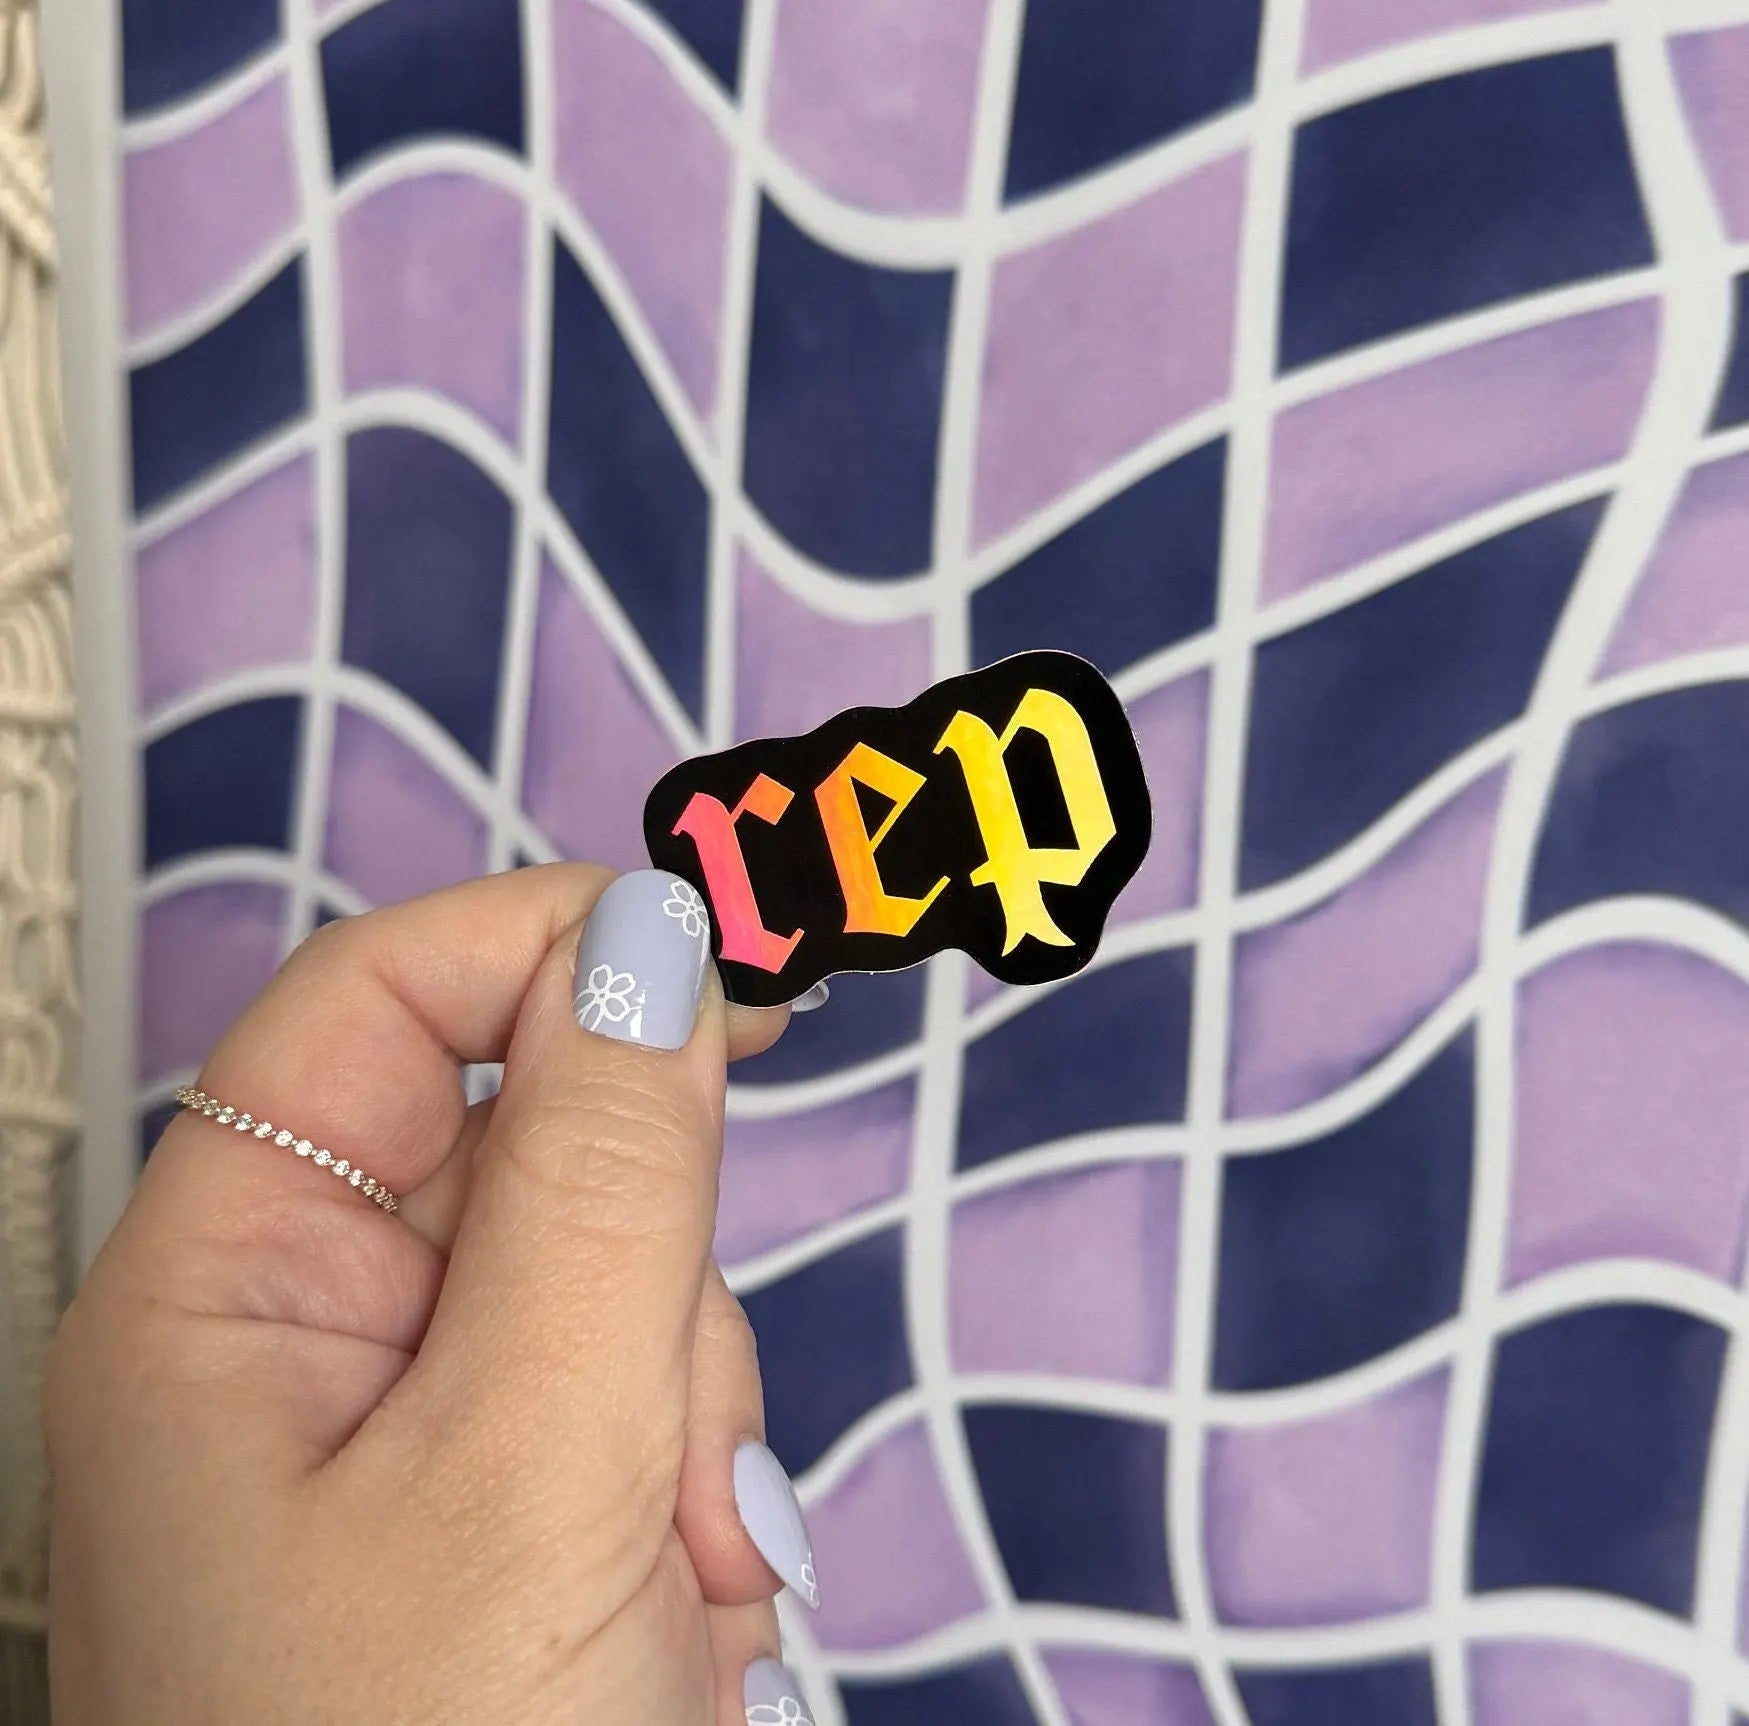 Rep holographic sticker MangoIllustrated